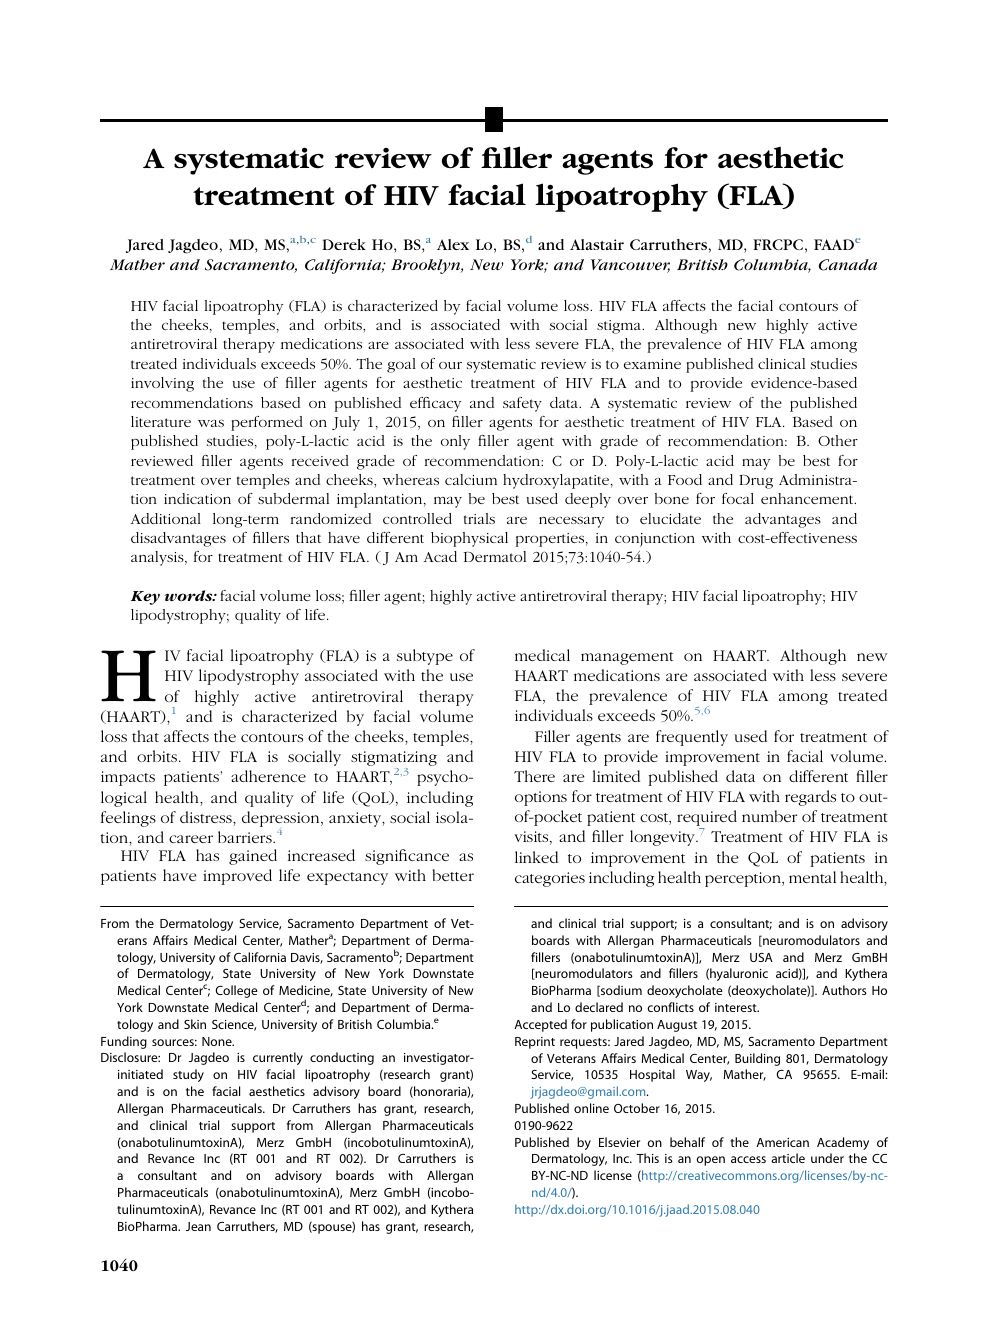 A Systematic Review Of Filler Agents For Aesthetic Treatment Of Hiv Facial Lipoatrophy Fla Topic Of Research Paper In Clinical Medicine Download Scholarly Article Pdf And Read For Free On Cyberleninka